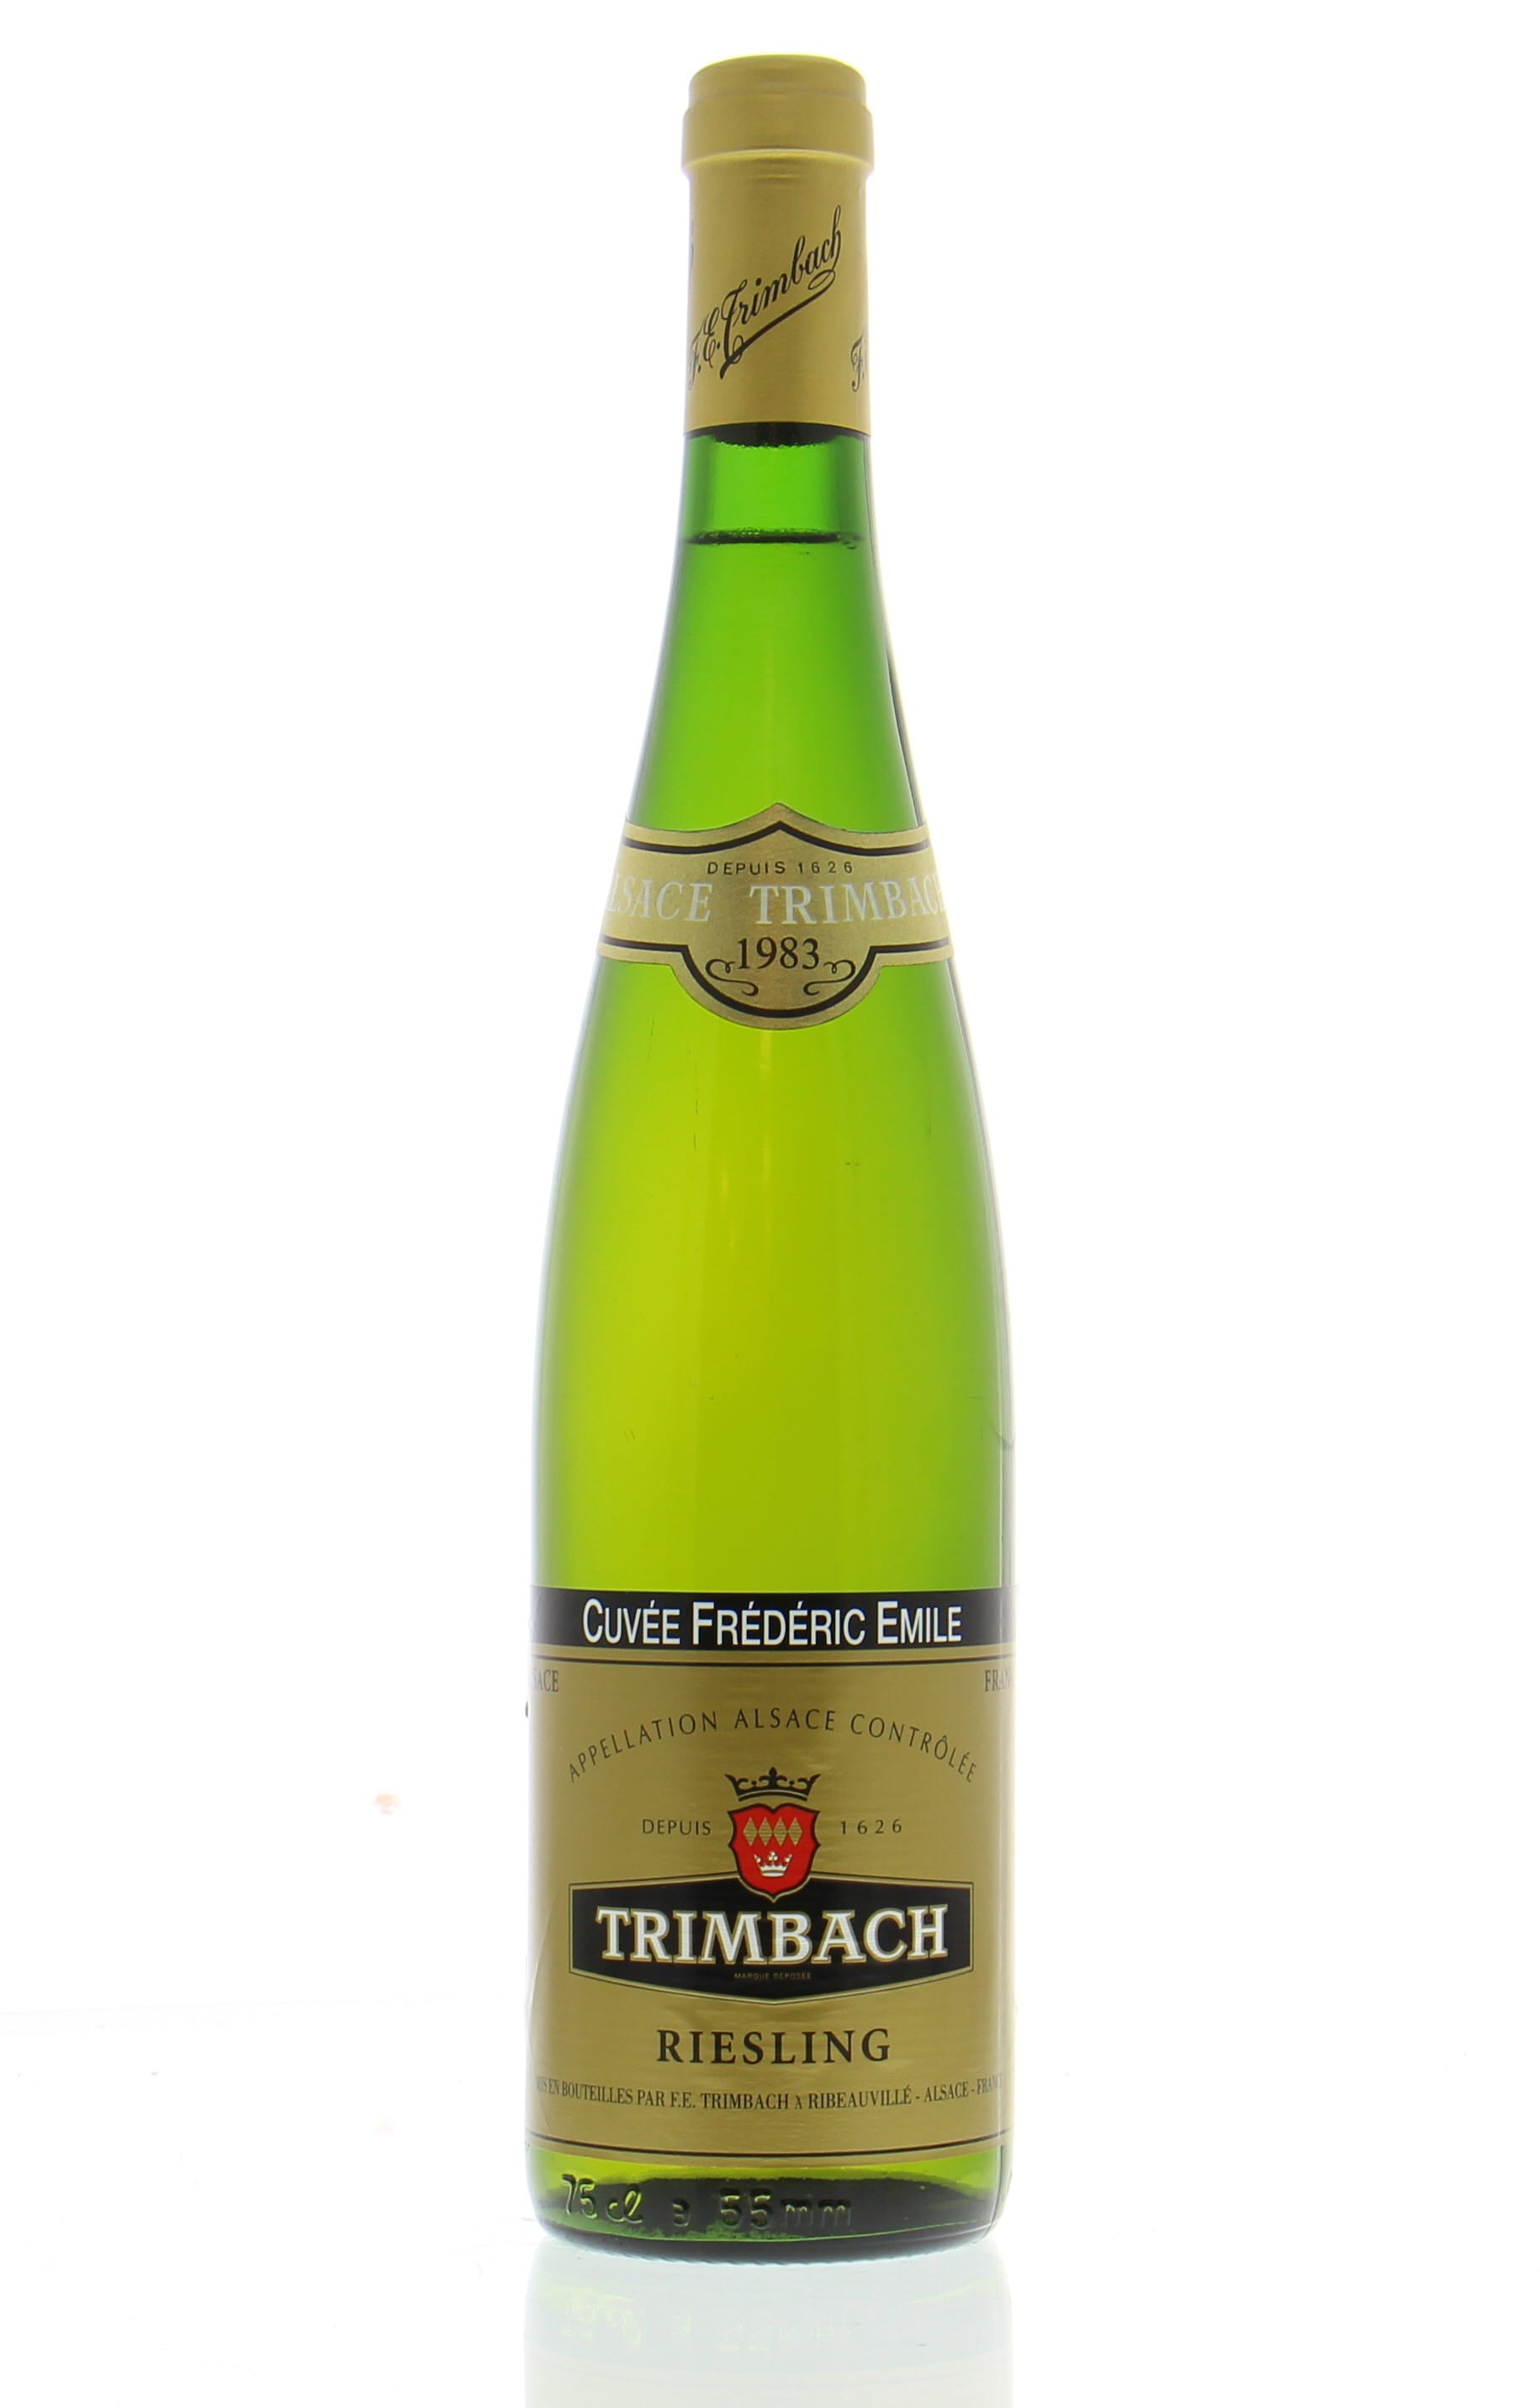 Trimbach - Riesling Cuvee Frederic Emile 1983 Perfect